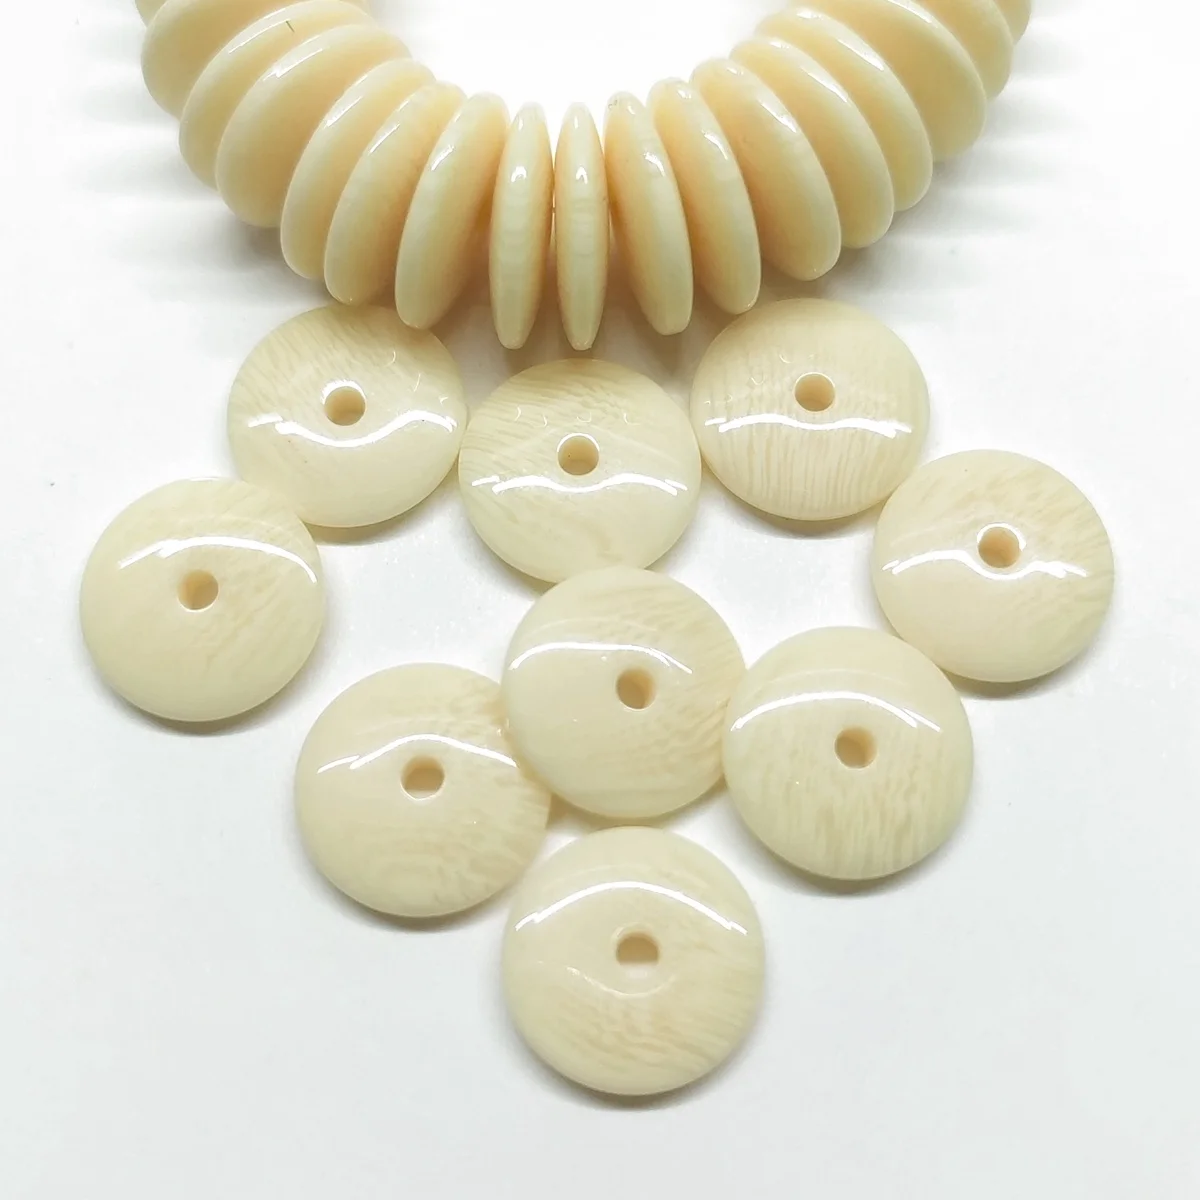 100pcs Beige Flat Round Resin Resin Imitation Ivory 6mm 8mm 10mm 12mm Loose Spacer Beads Wholesale lot for Jewelry Making 12x8mm strong round cylinder magnets 12mm x 8mm rare earth neodymium 12 8mm art craft connection imanes 10 30 50 100pcs